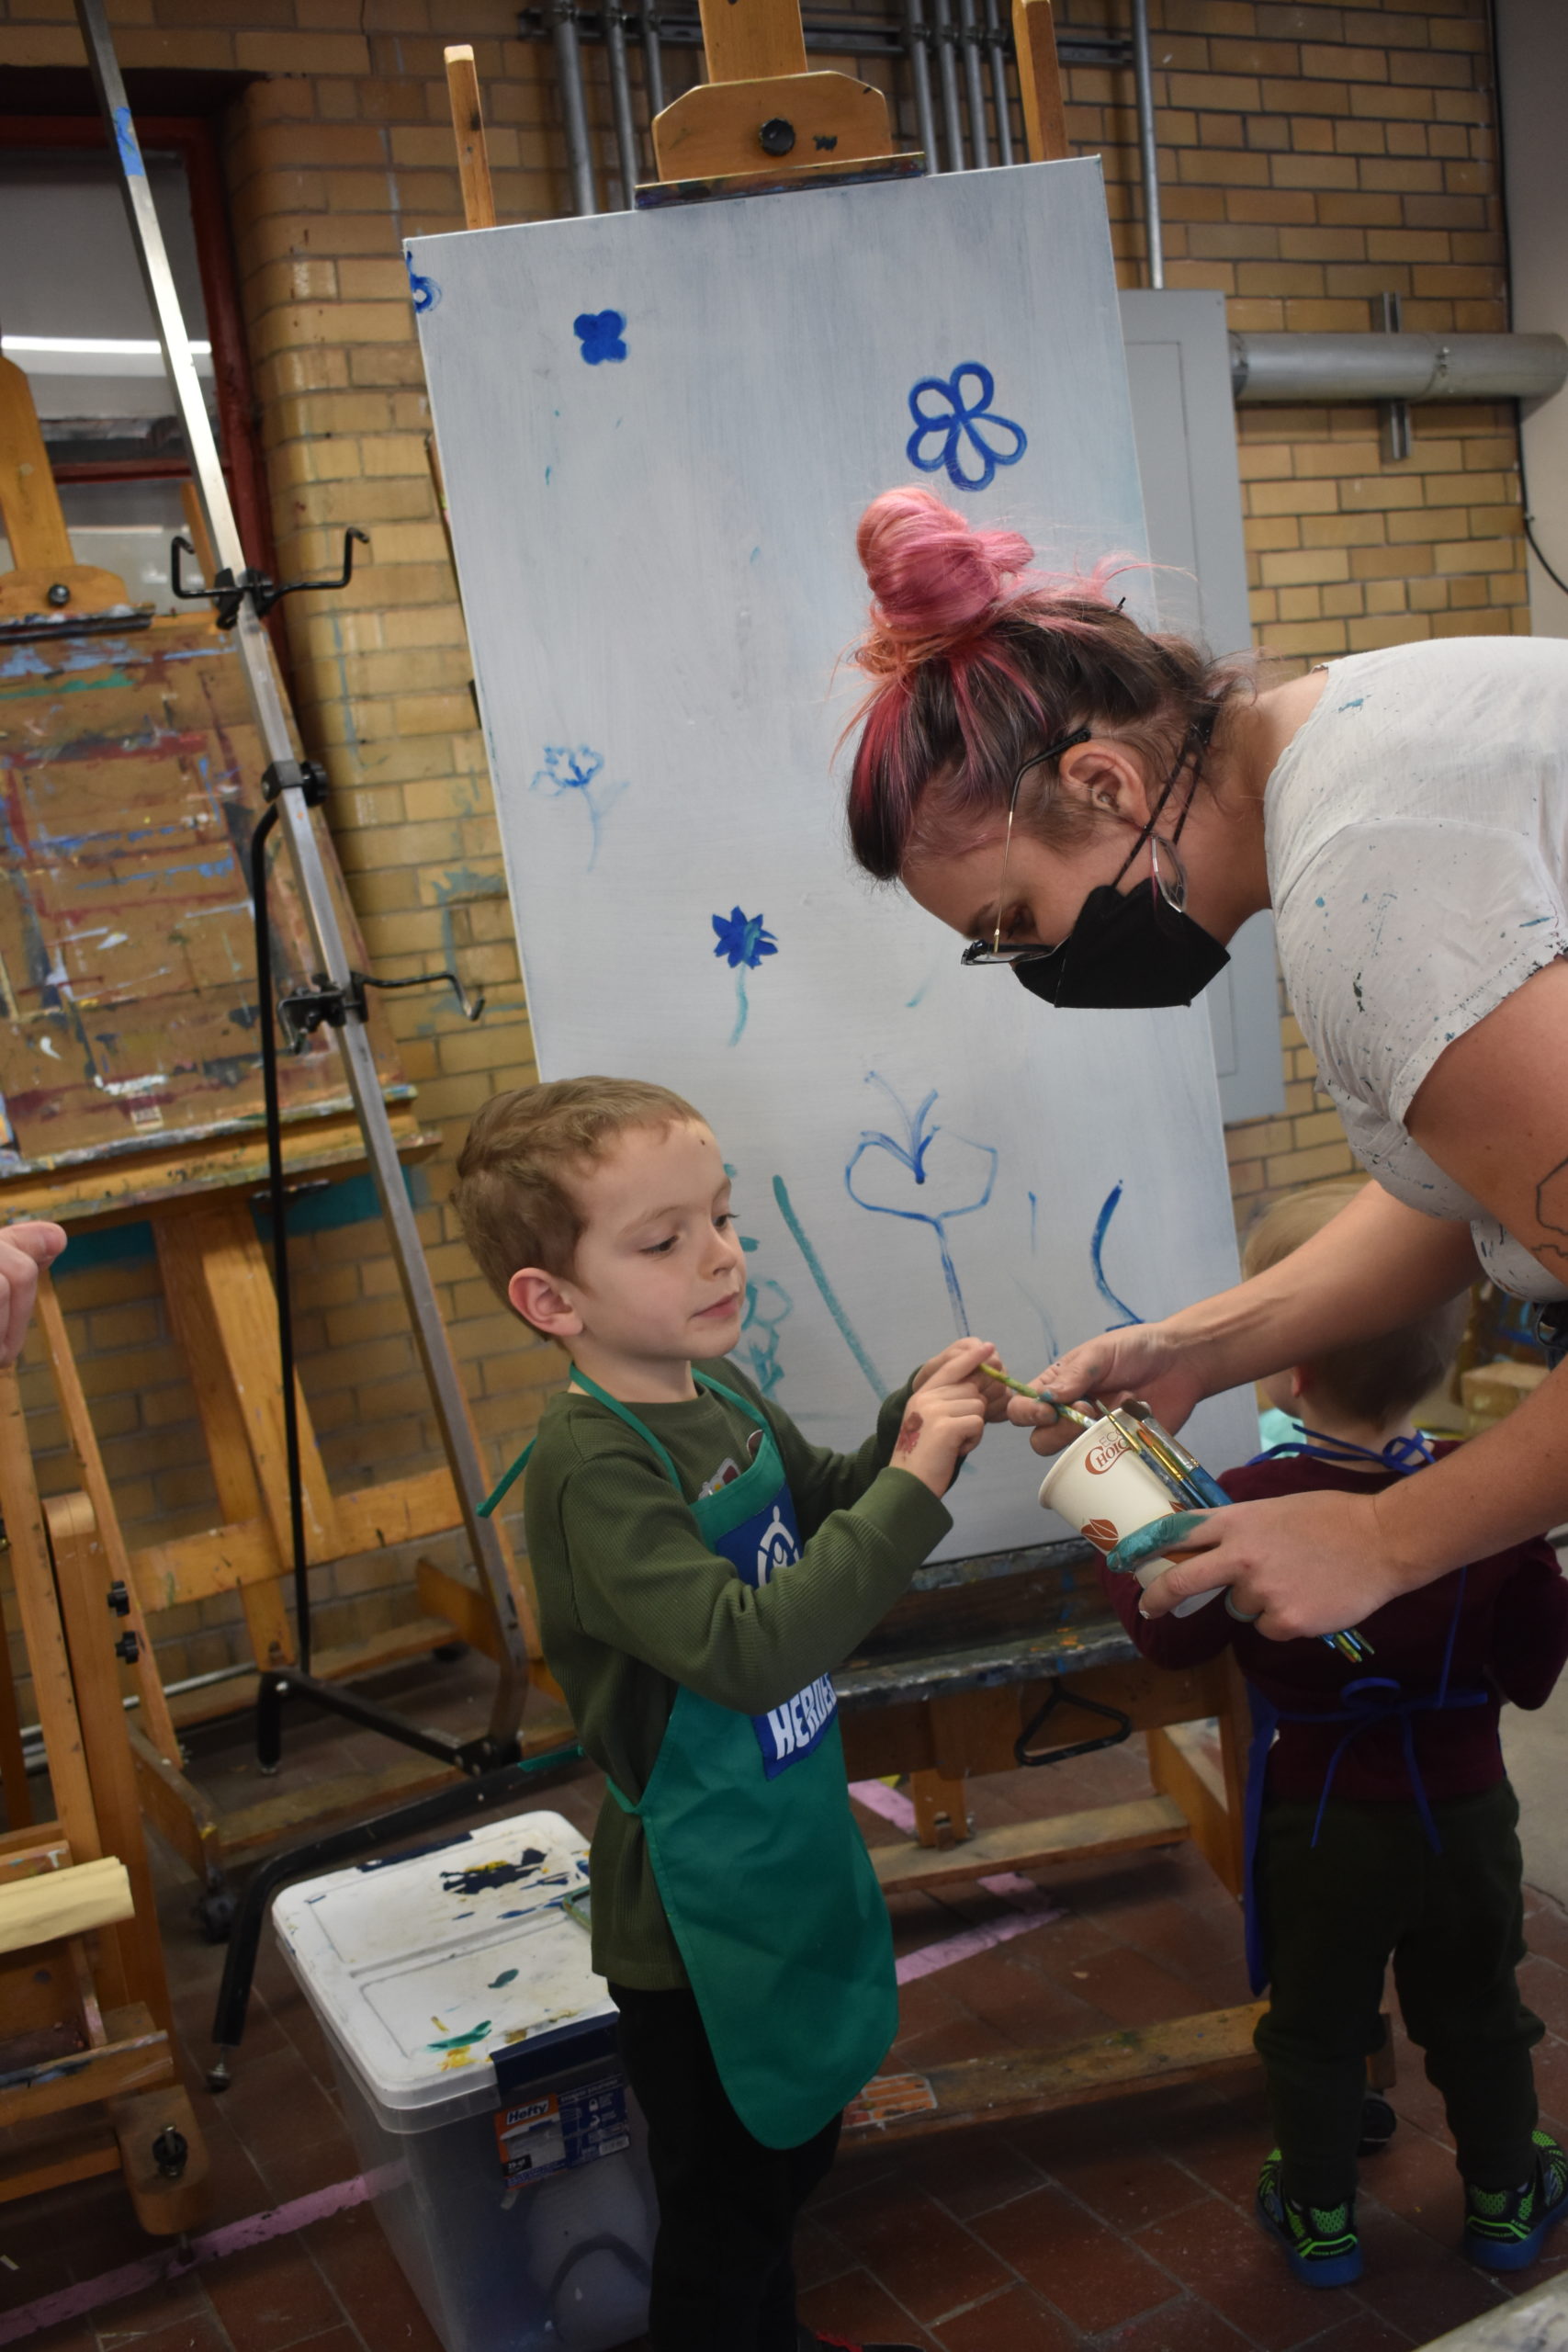 A child helping an artist paint on a large canvas